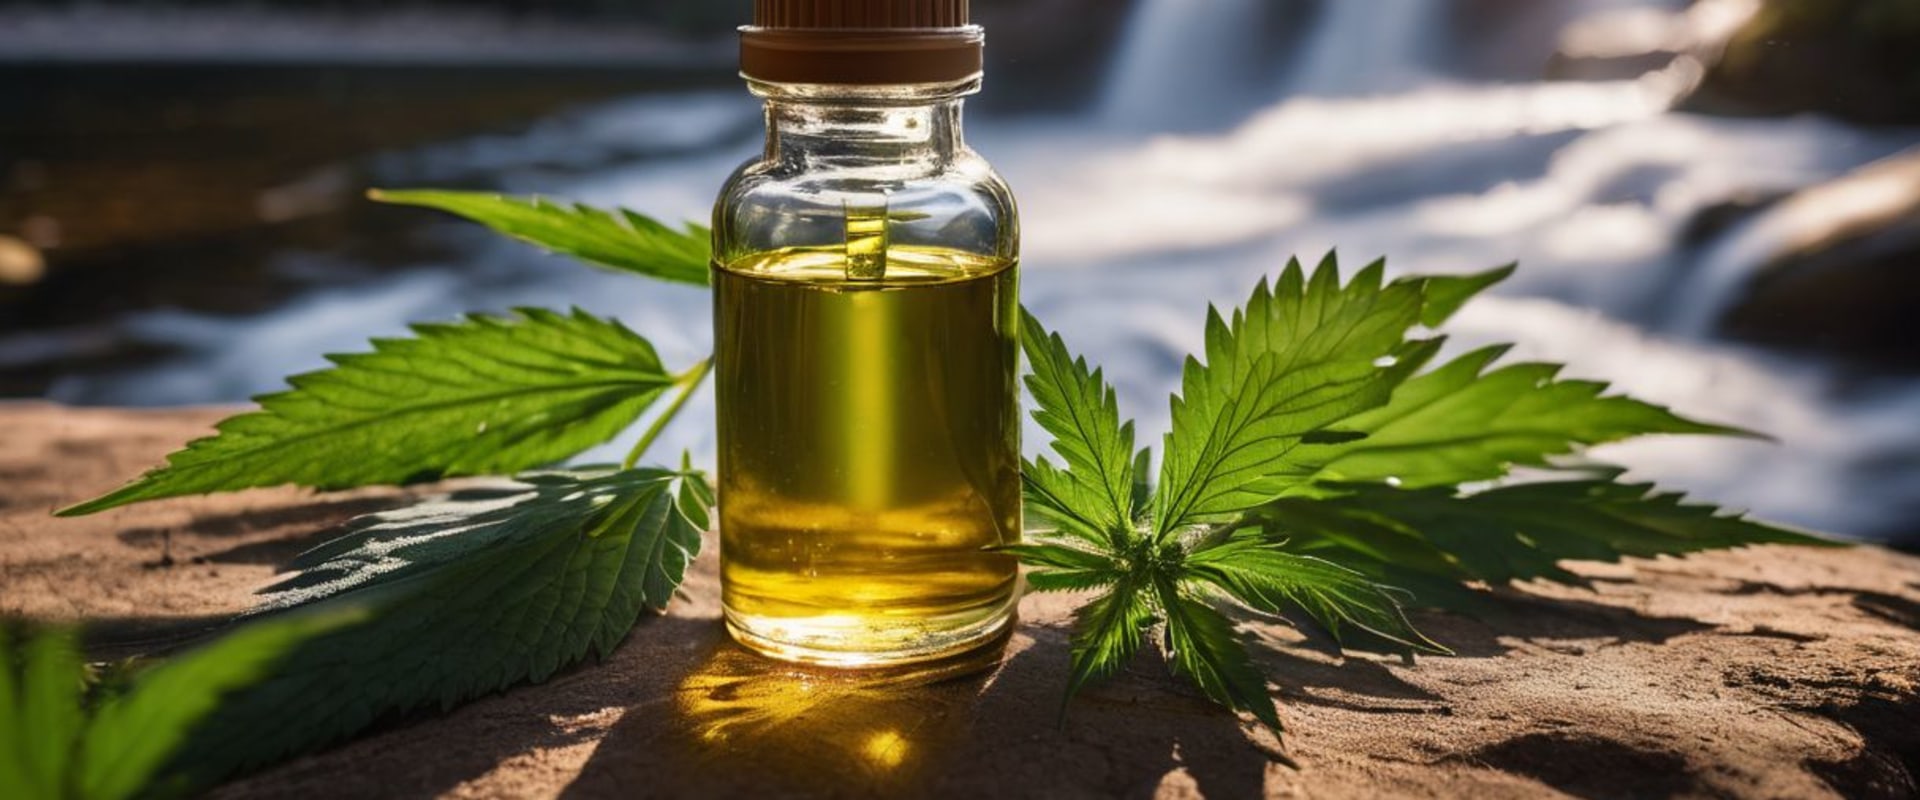 The Truth About CBD: Benefits and Risks